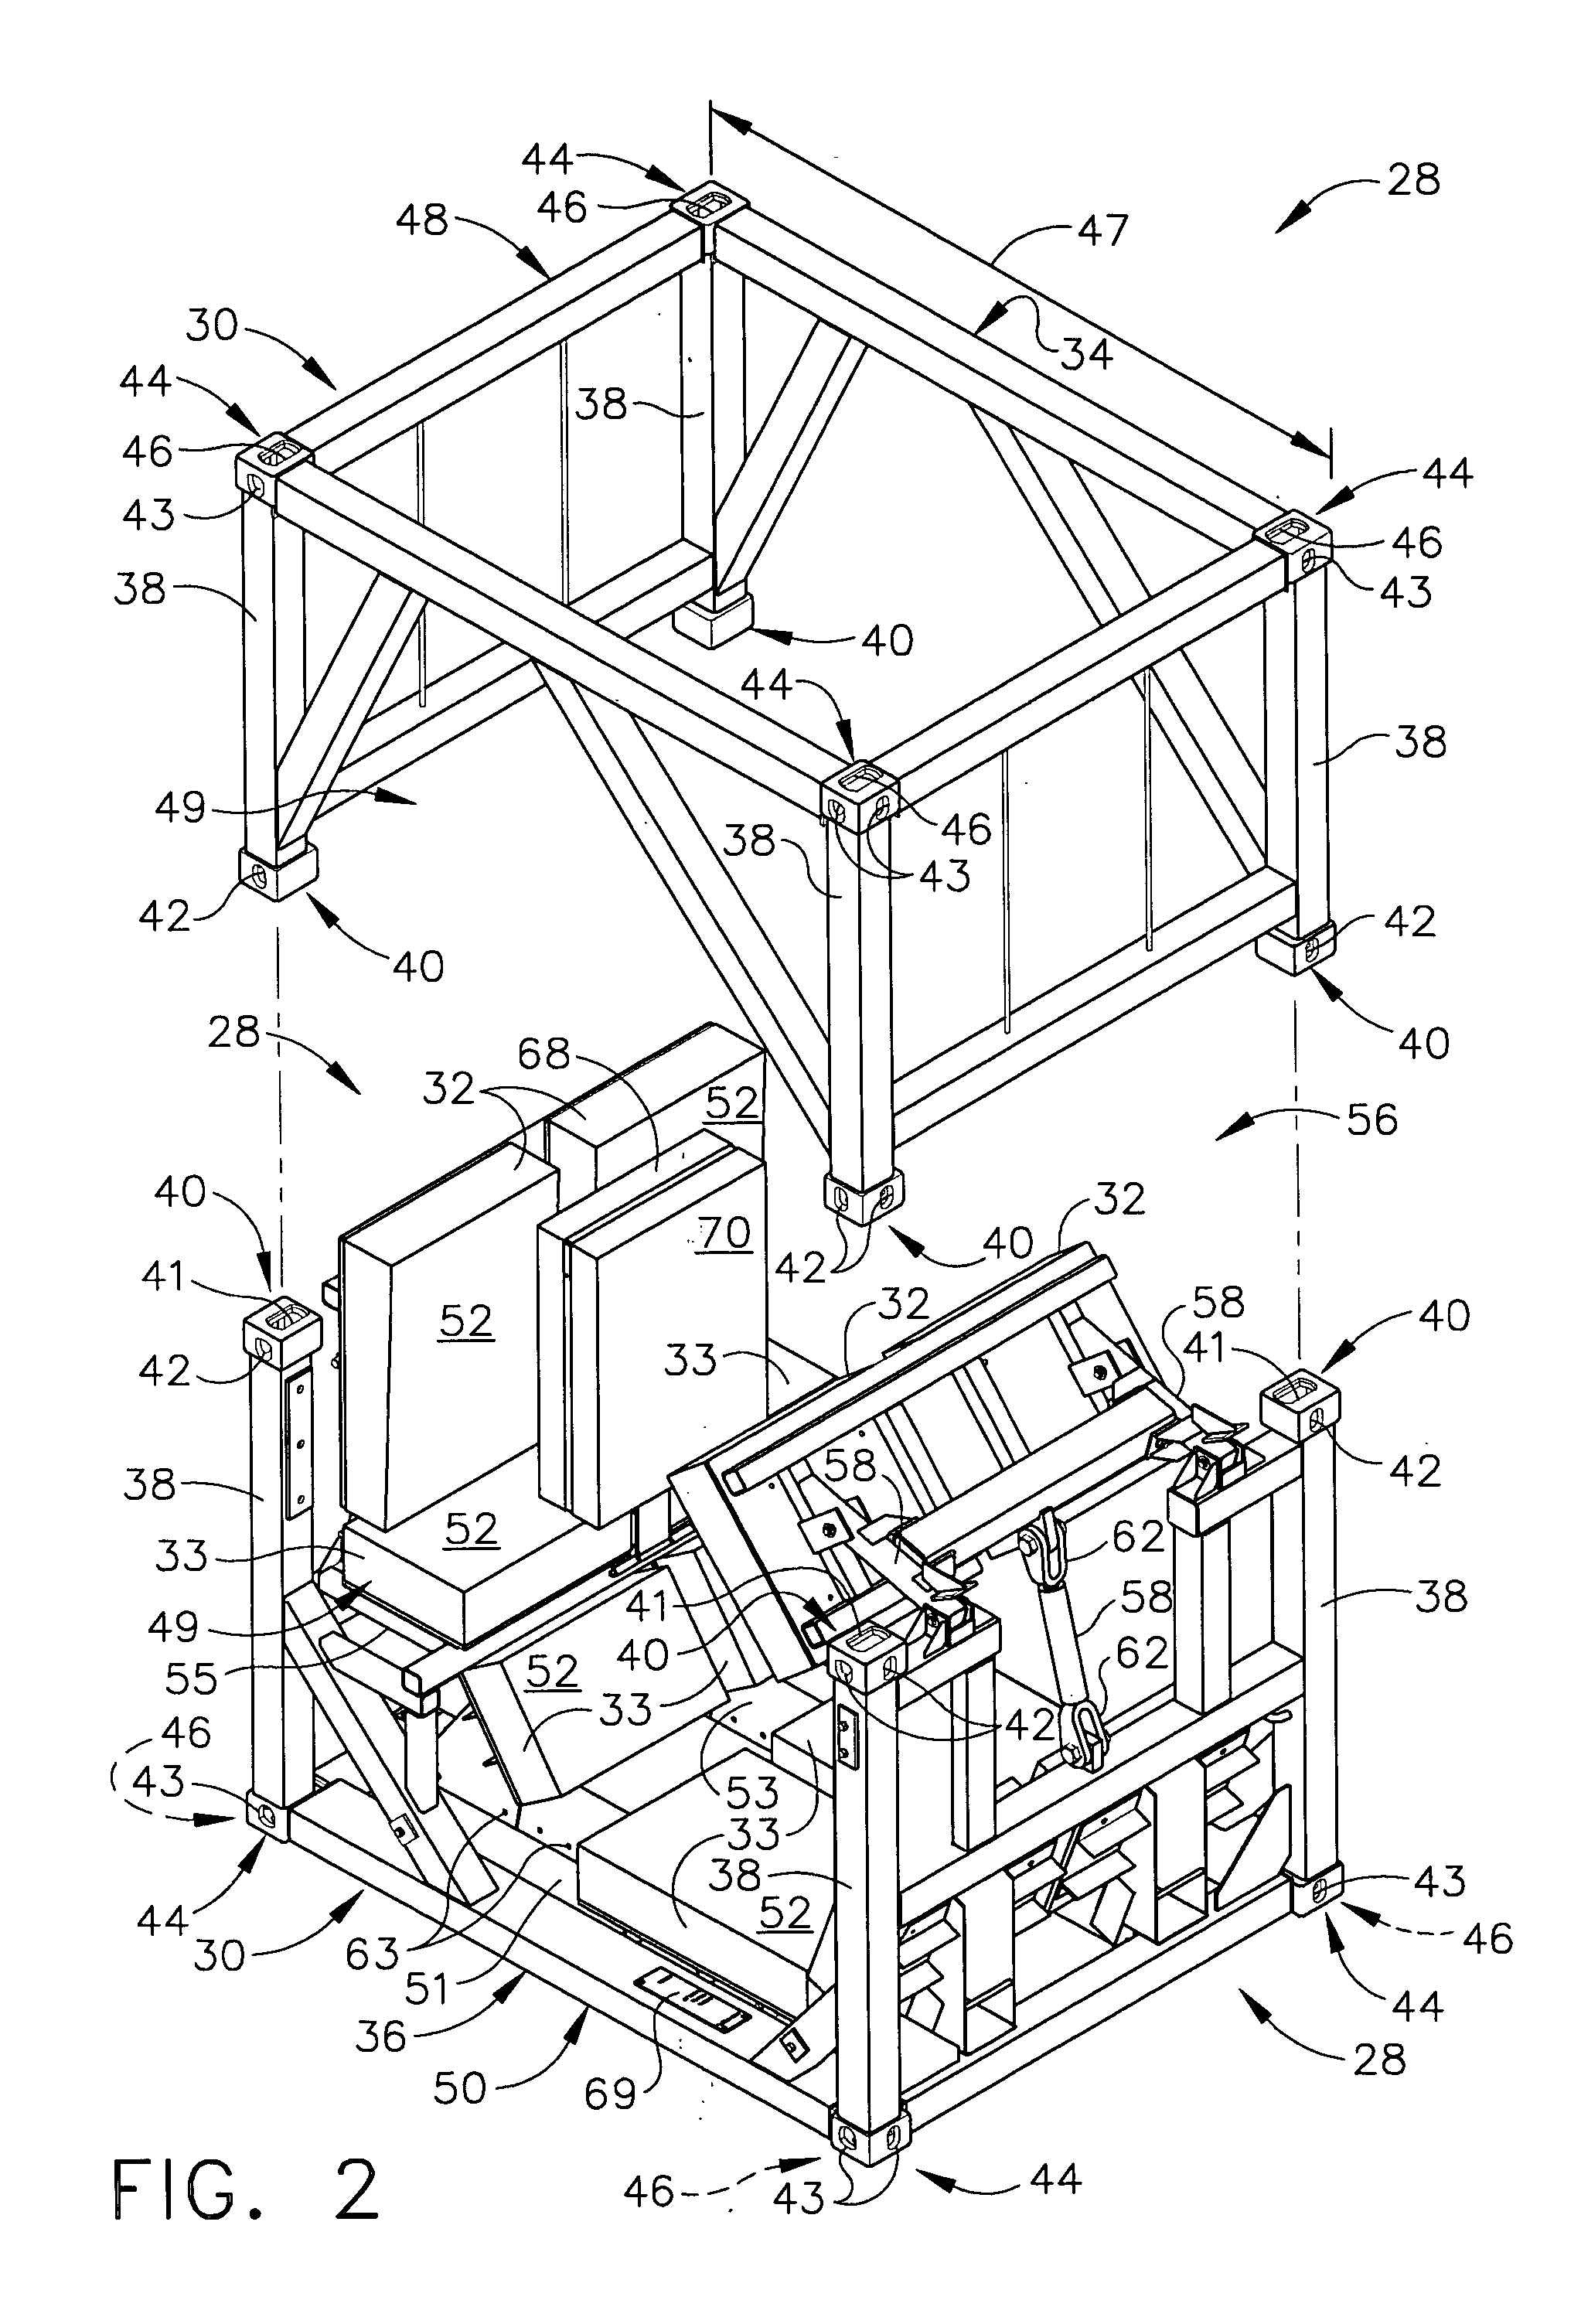 Method and apparatus for containing and/or transporting rotor blades